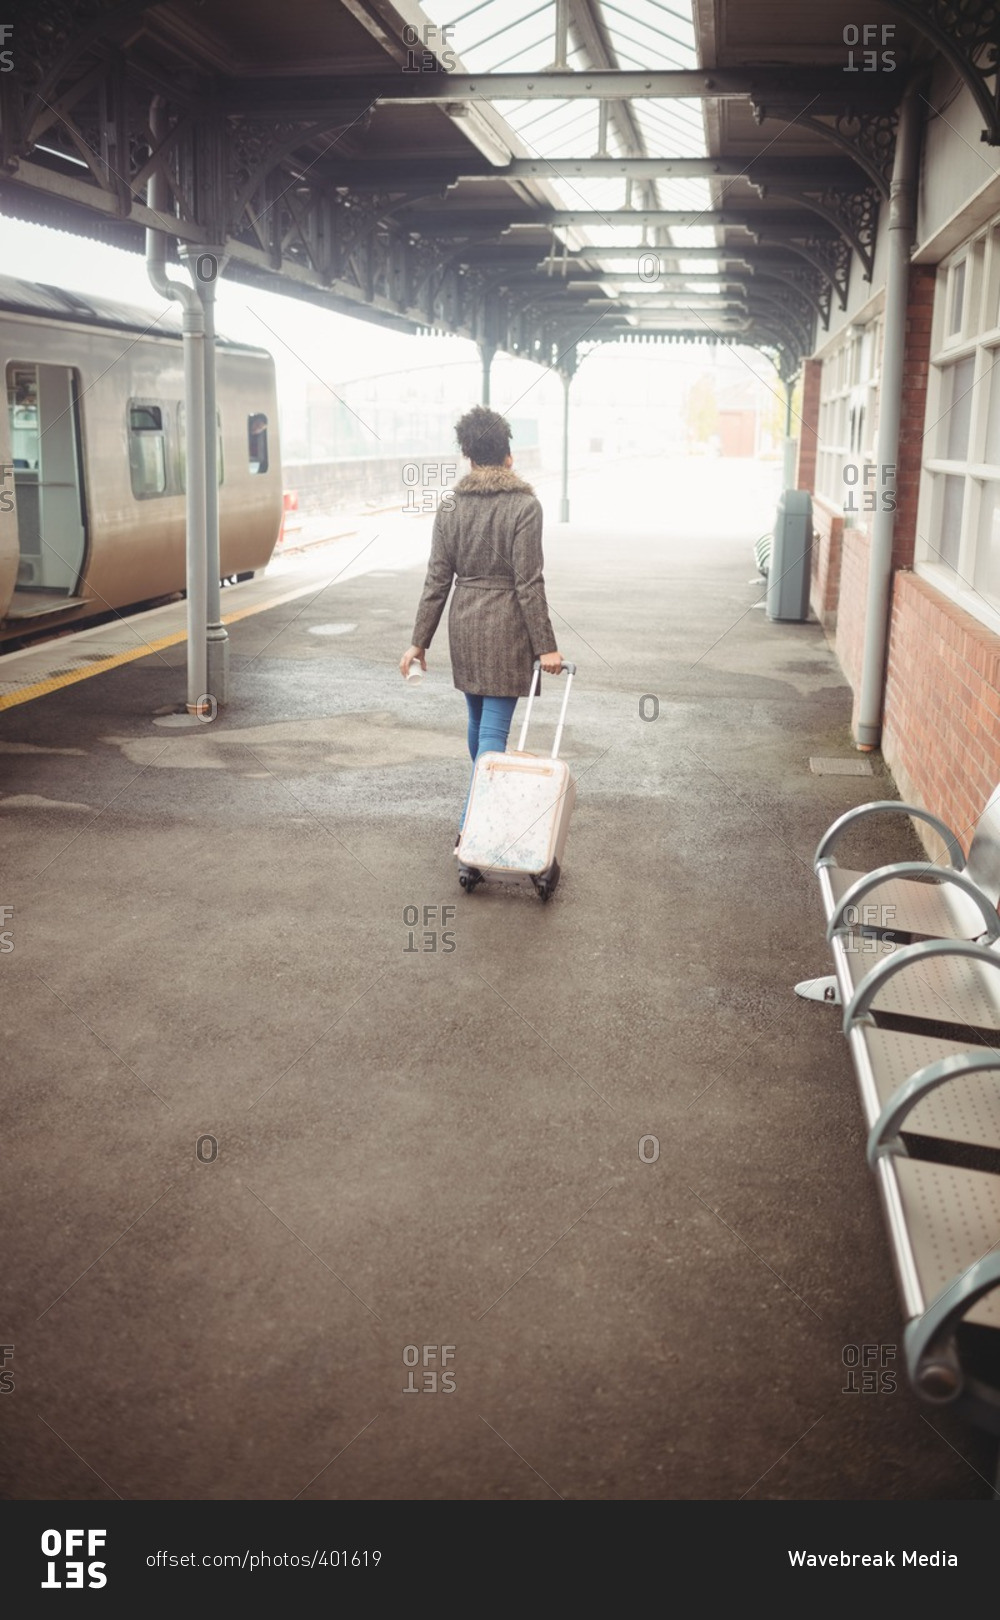 Rear view of woman carrying luggage at railroad station platform